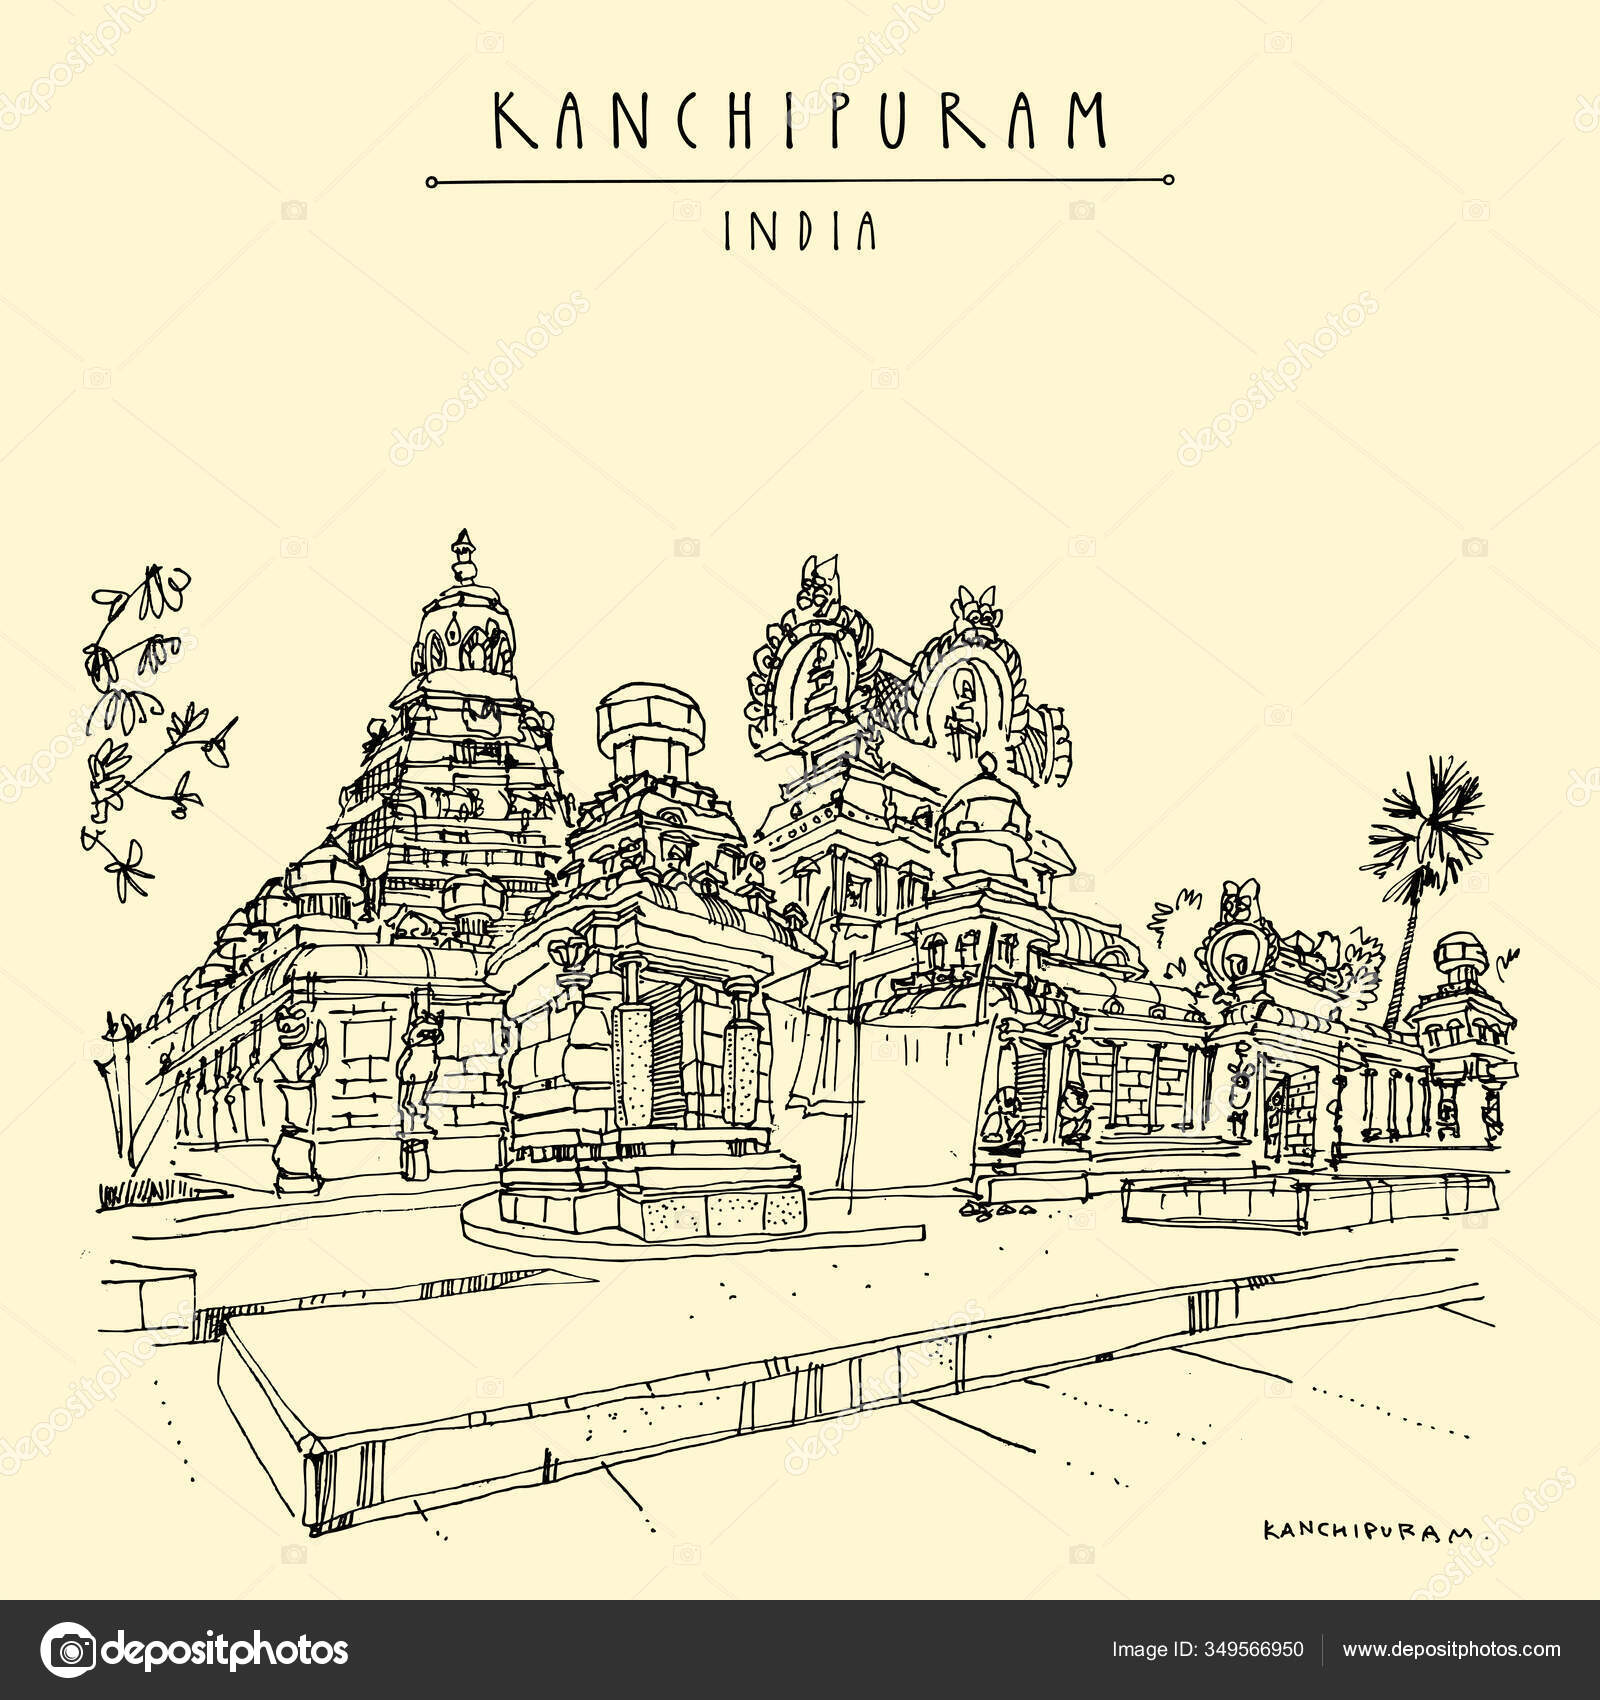 1828 South India Sketch Images Stock Photos  Vectors  Shutterstock